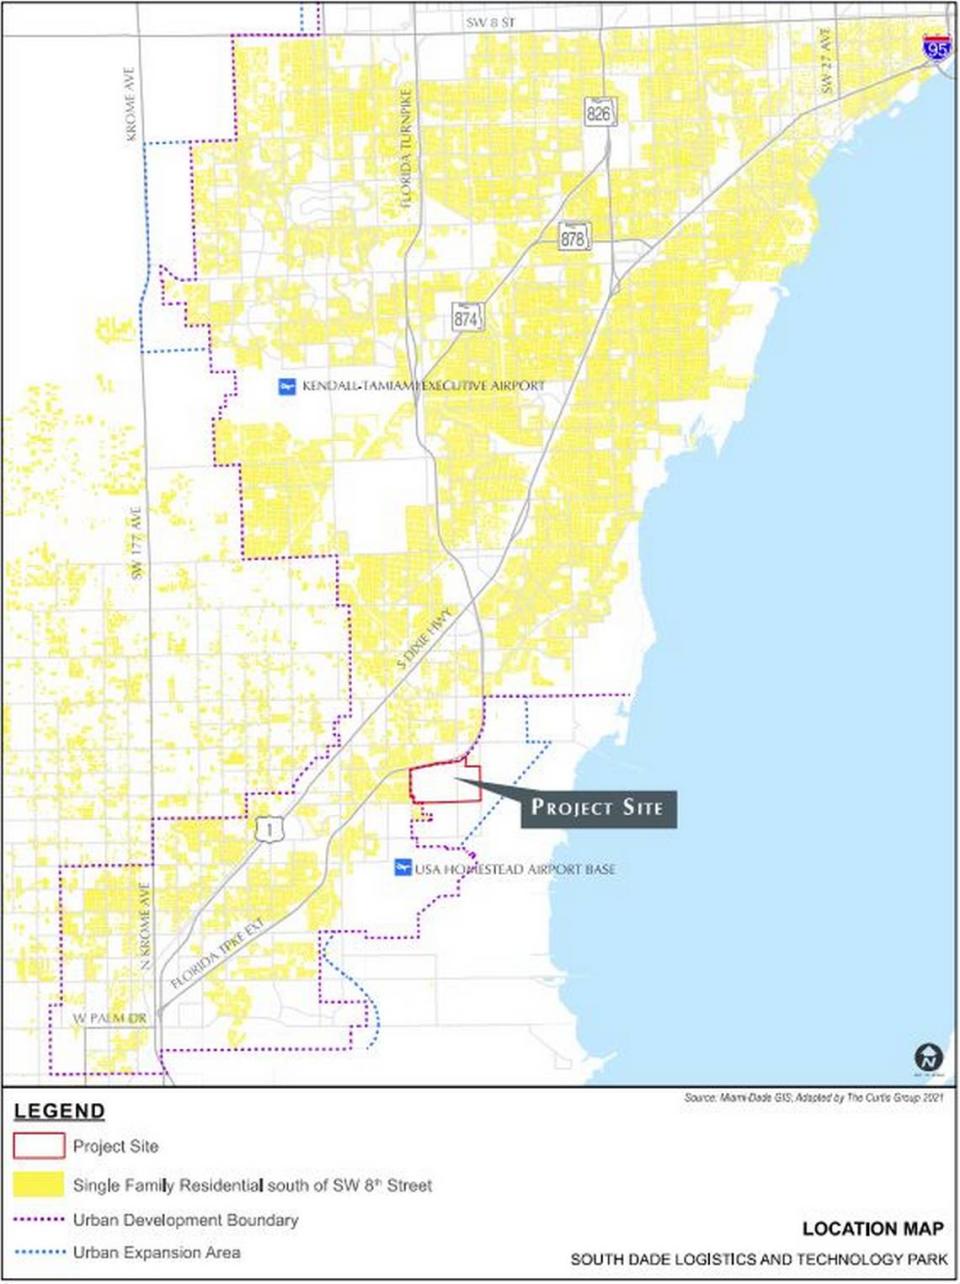 Miami-Dade County commissioners approved the expansion of the Urban Development Boundary for the South Dade Logistics & Technology District by a one-vote margin. Legal challenges are still unresolved.